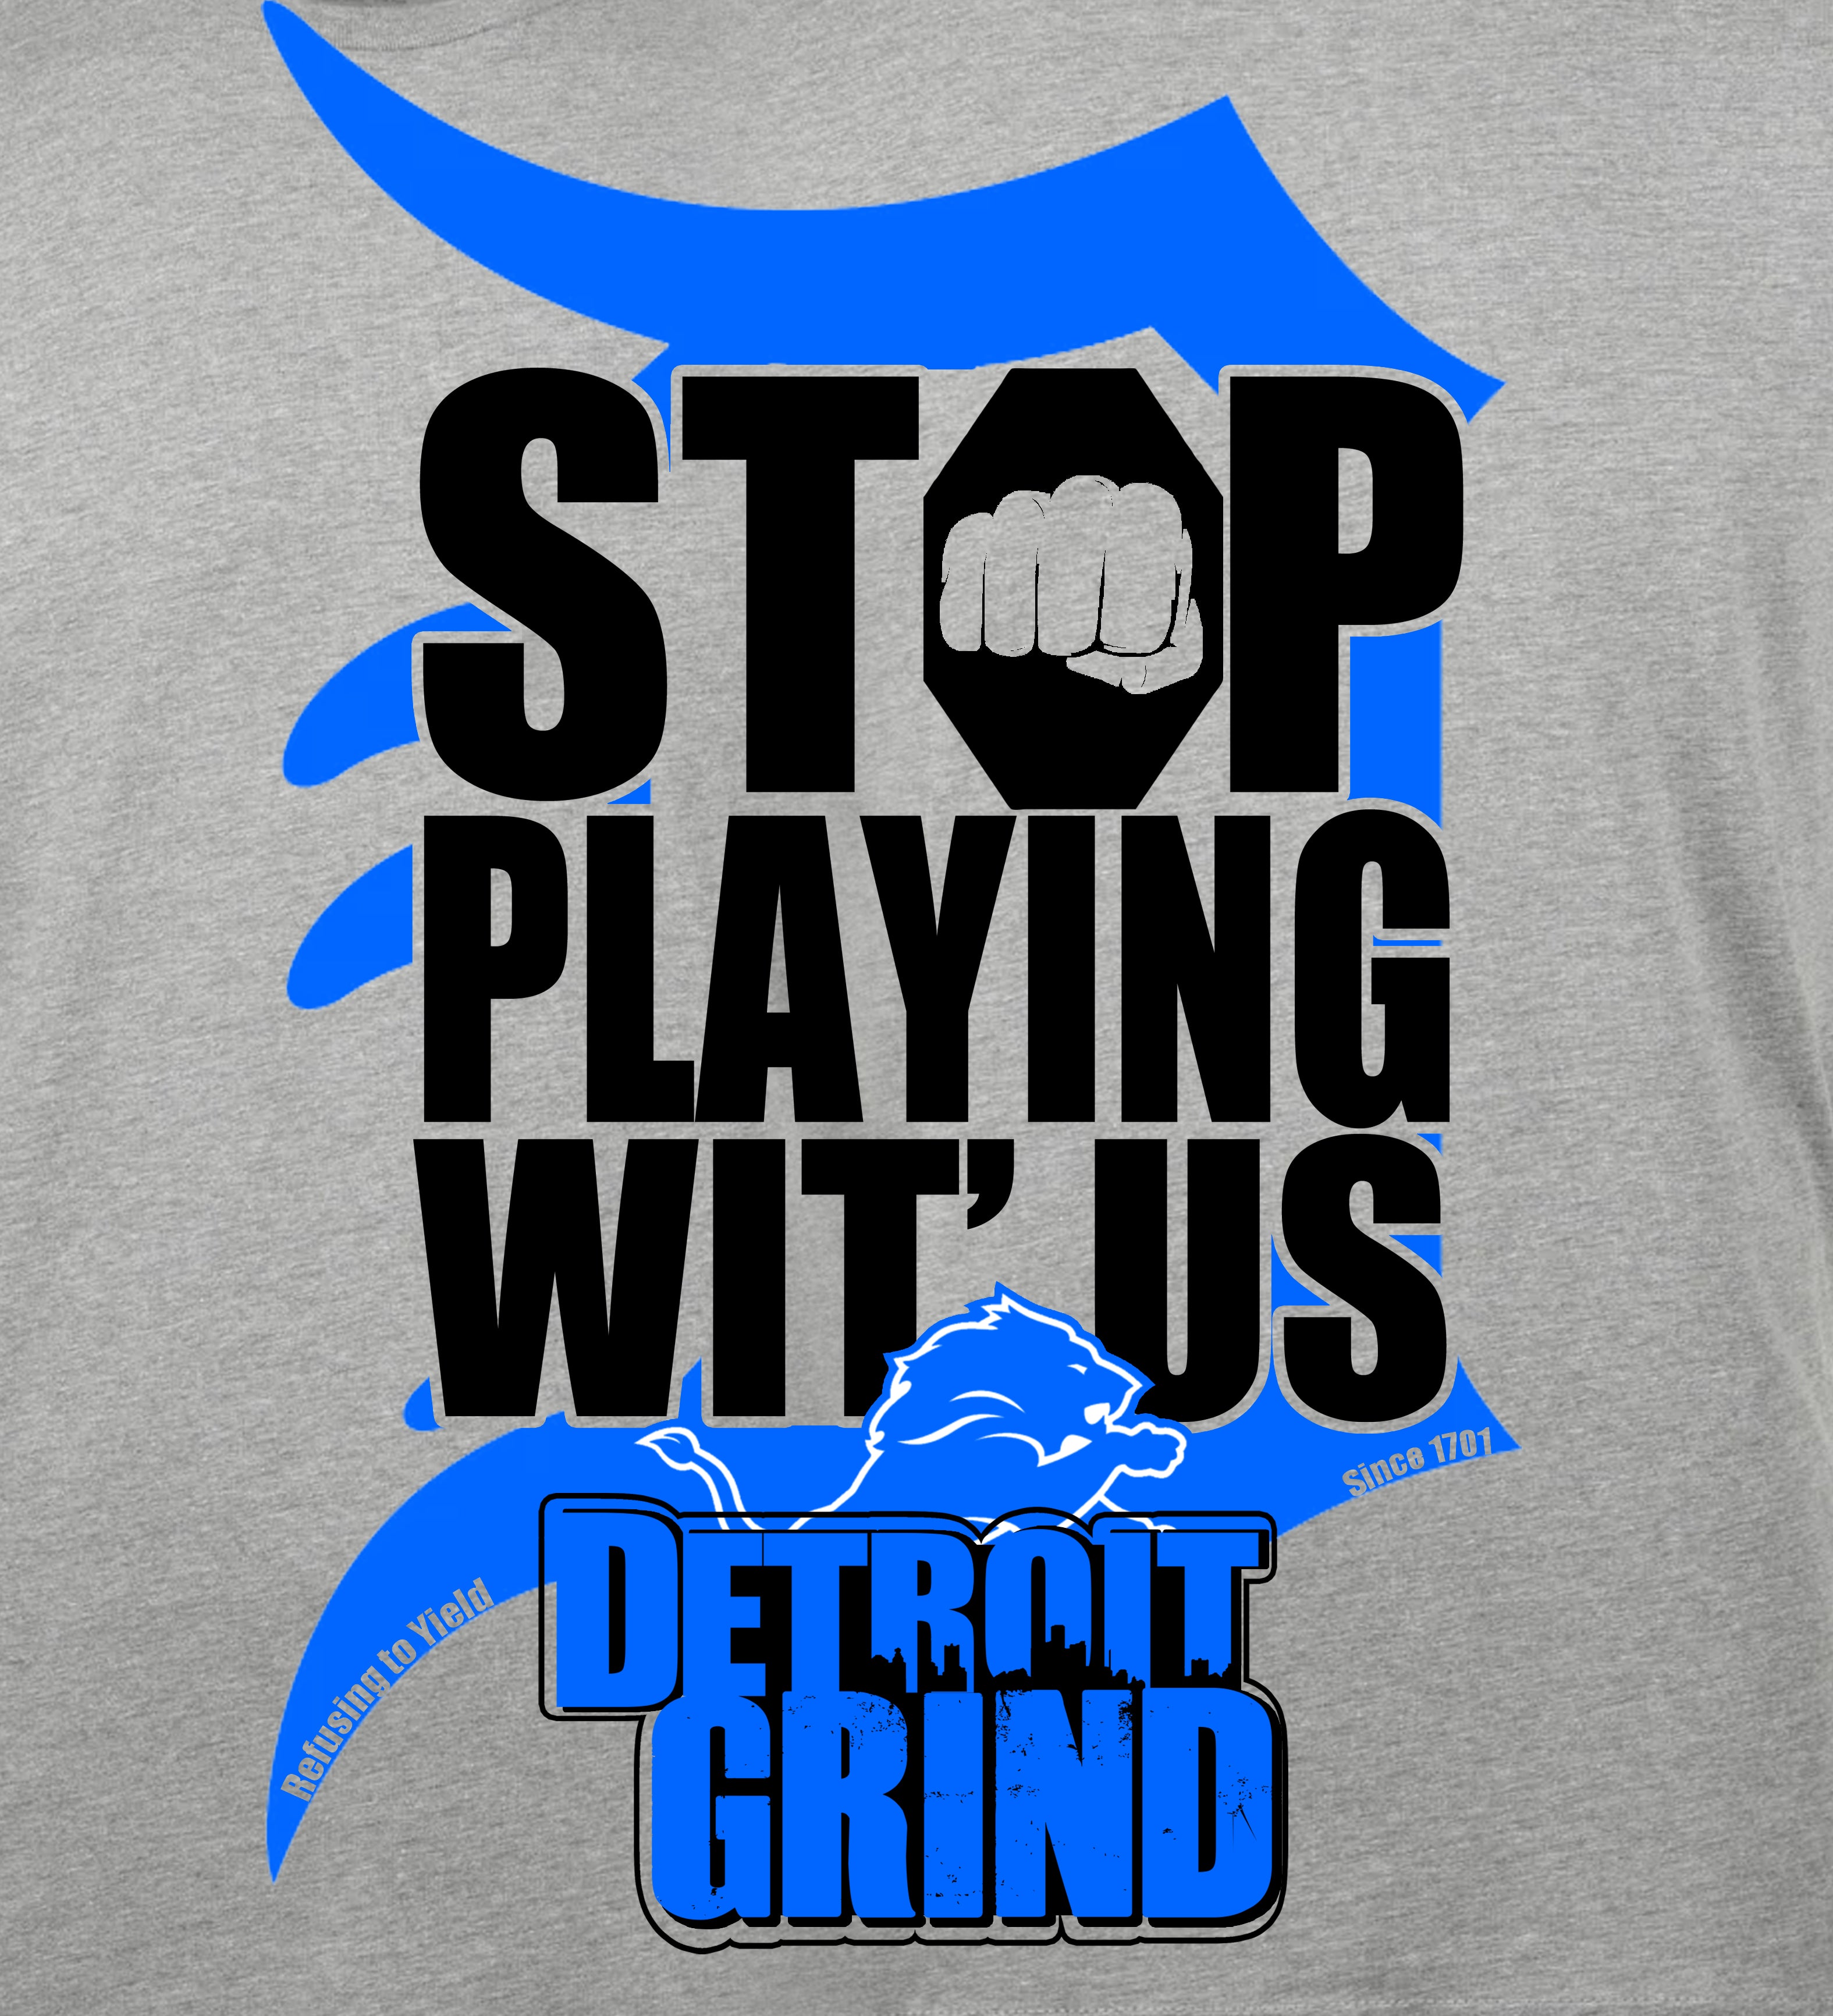 Stop Playin Wit Us - Detroit Grind Tee